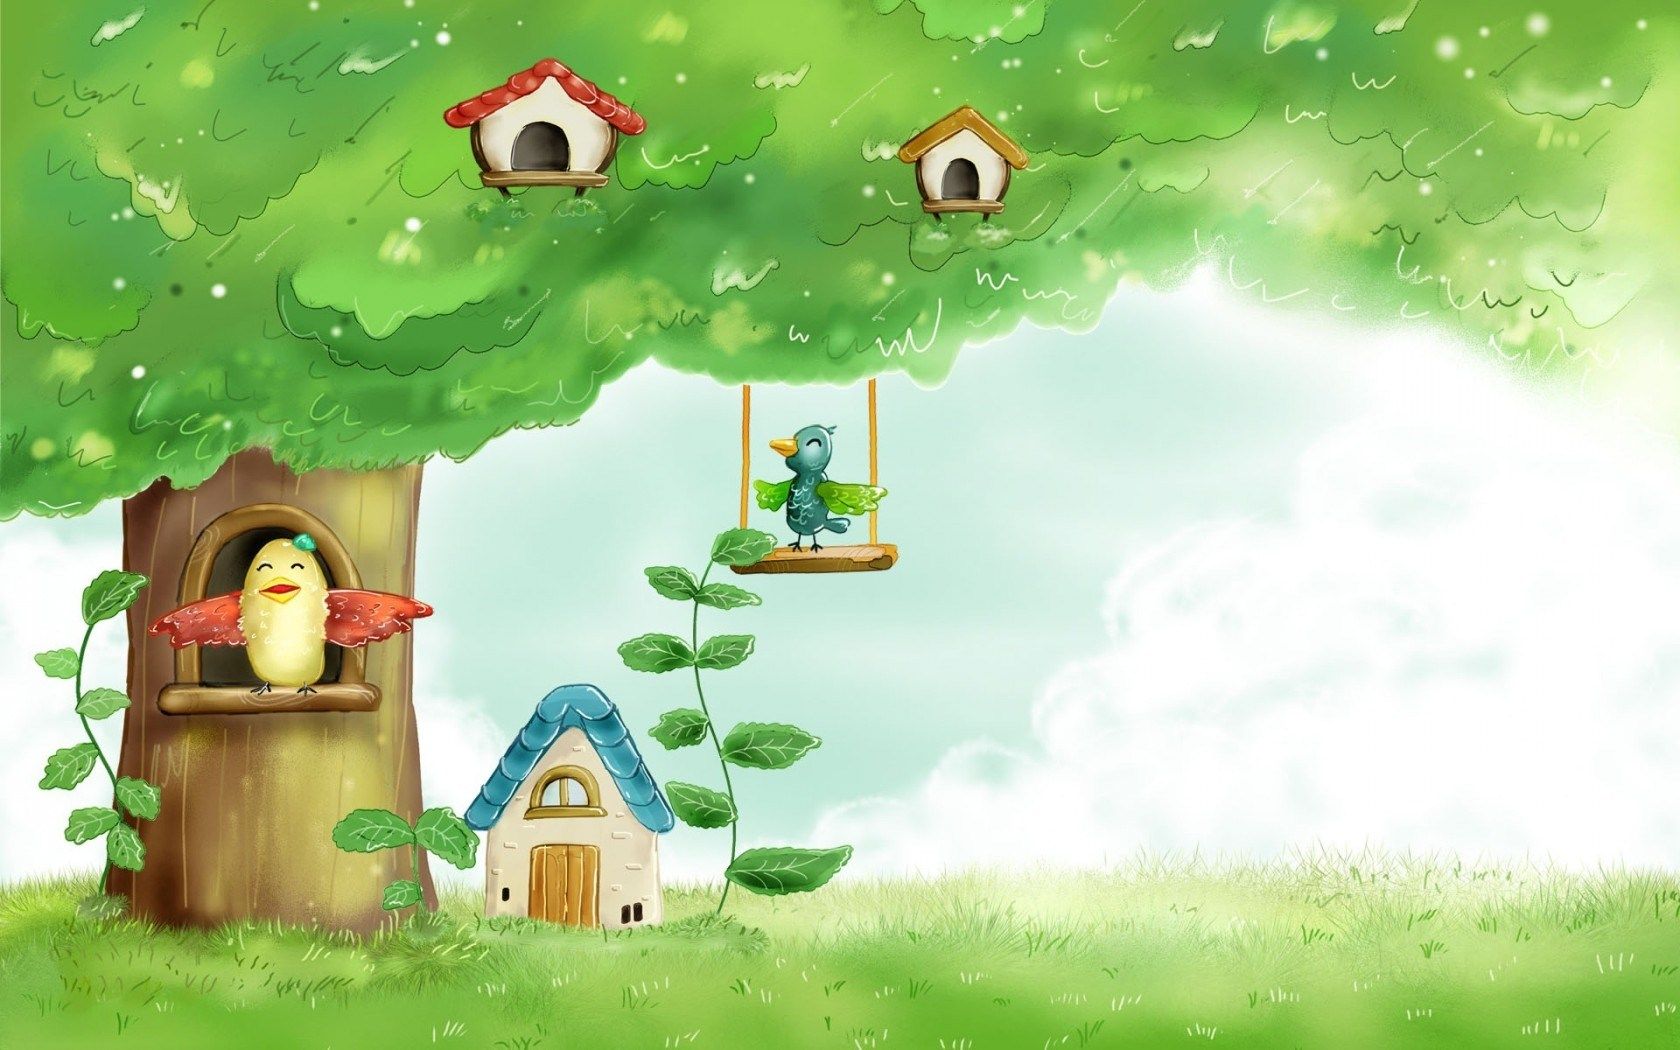 HD wallpaper, Tale, Leaves, Drawing, Grass, Birds, Fairy, Tree, Painting, Houses, Childhood